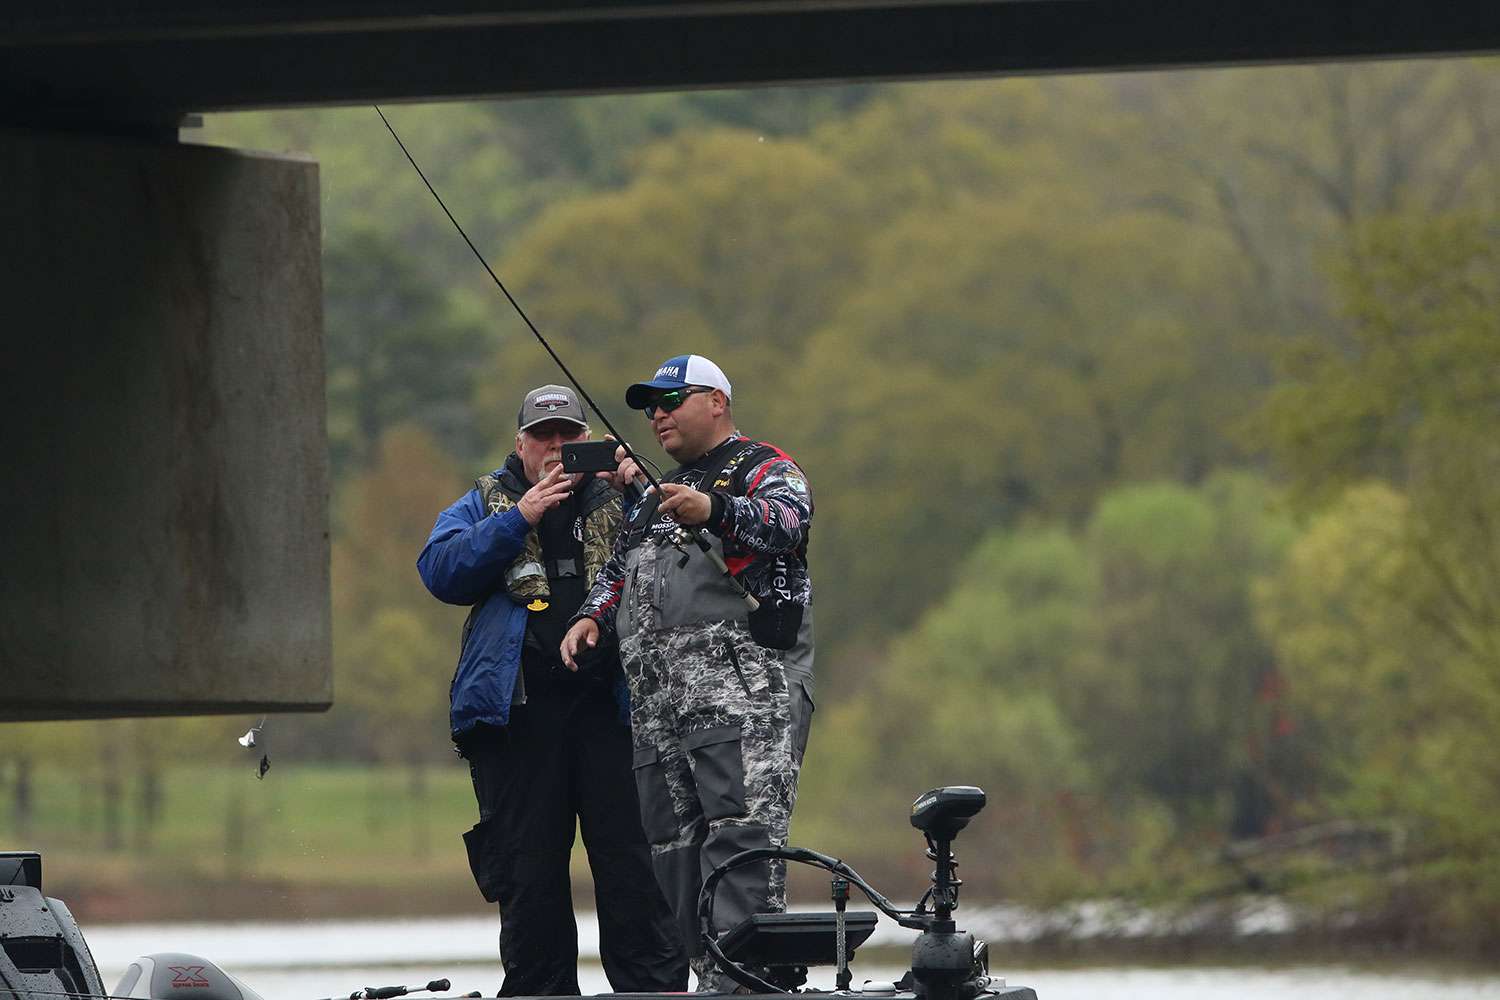 Bill Lowen and Gary Clouse had solid days at the 2019 Bassmaster Elite at Lake Hartwell.